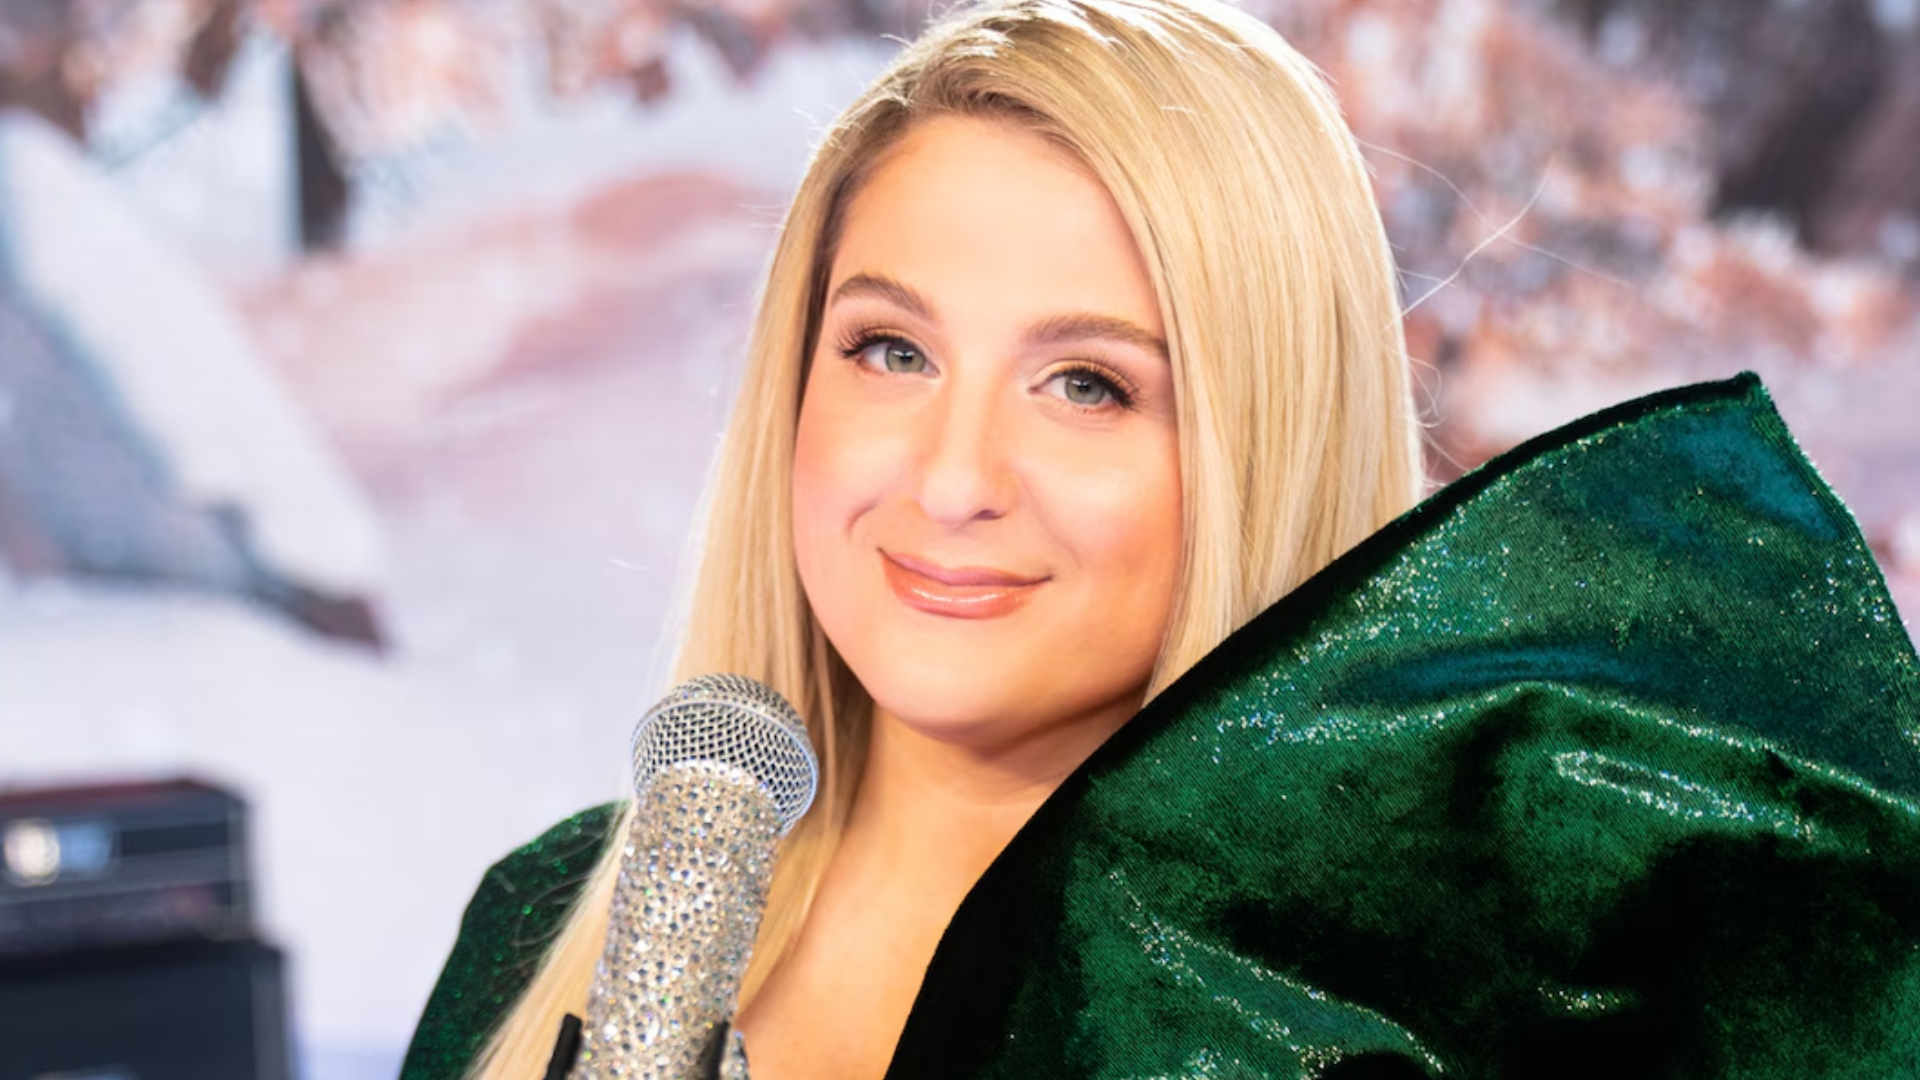 Meghan Trainor's Dream Come True: Exciting New Role as an 'American Idol' Judge